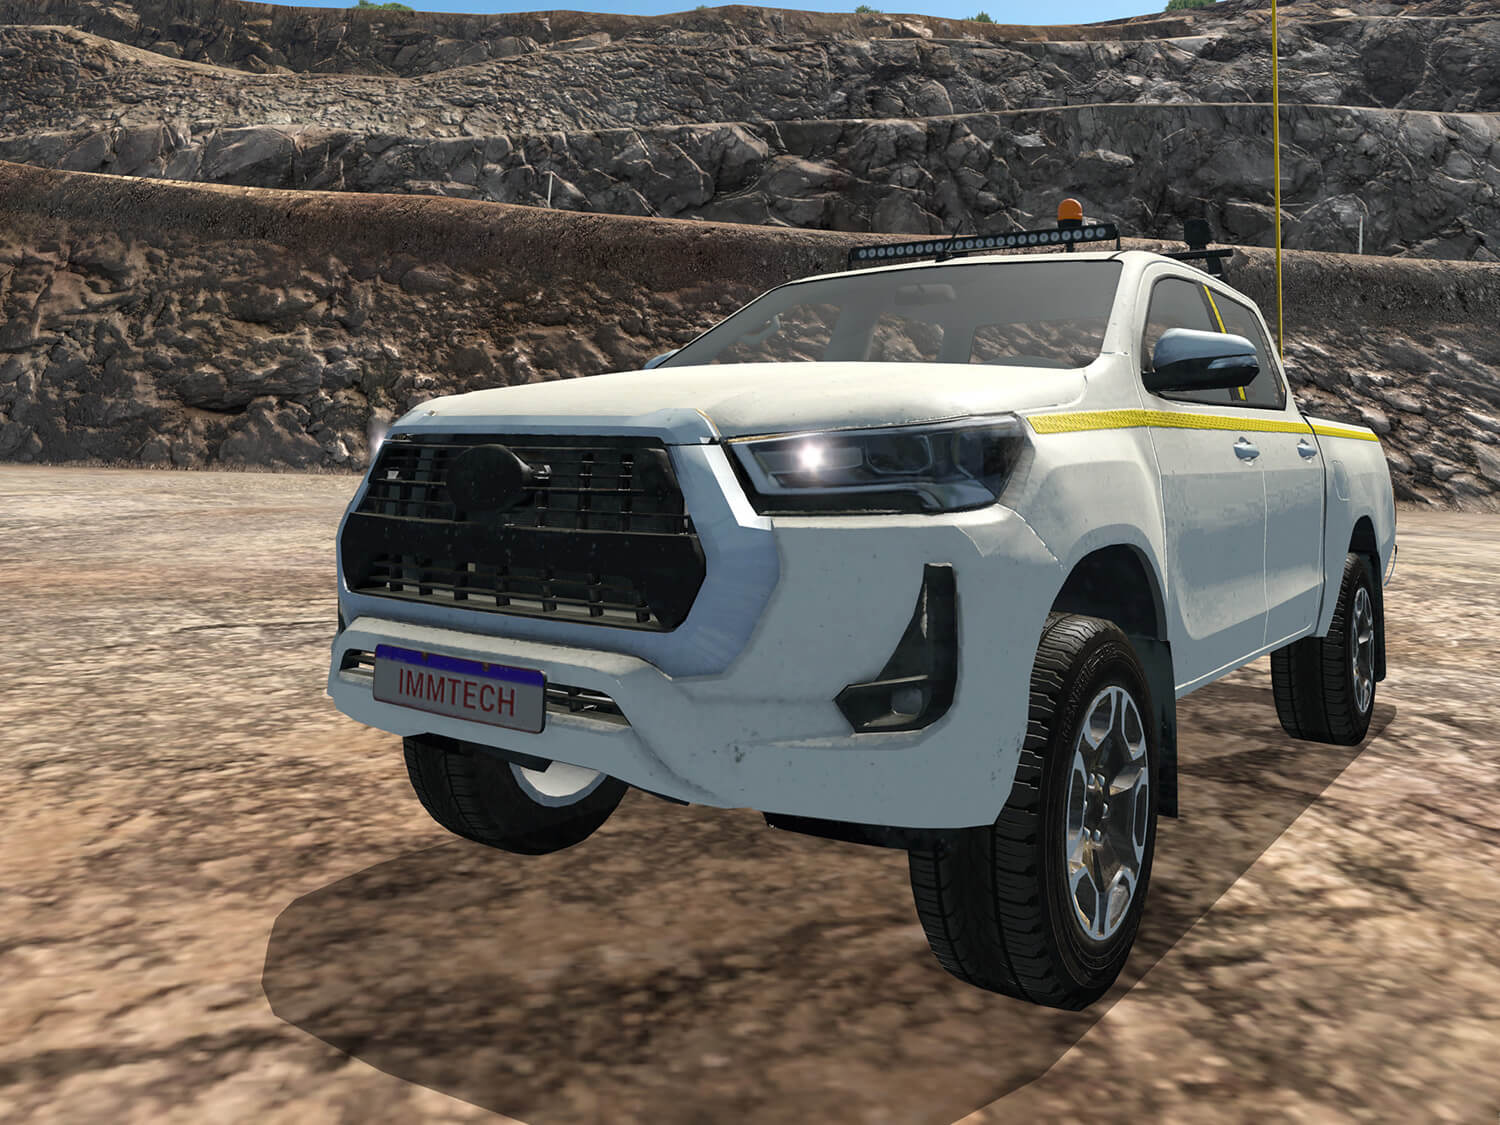 Toyota Hilux Automatic Driving Training